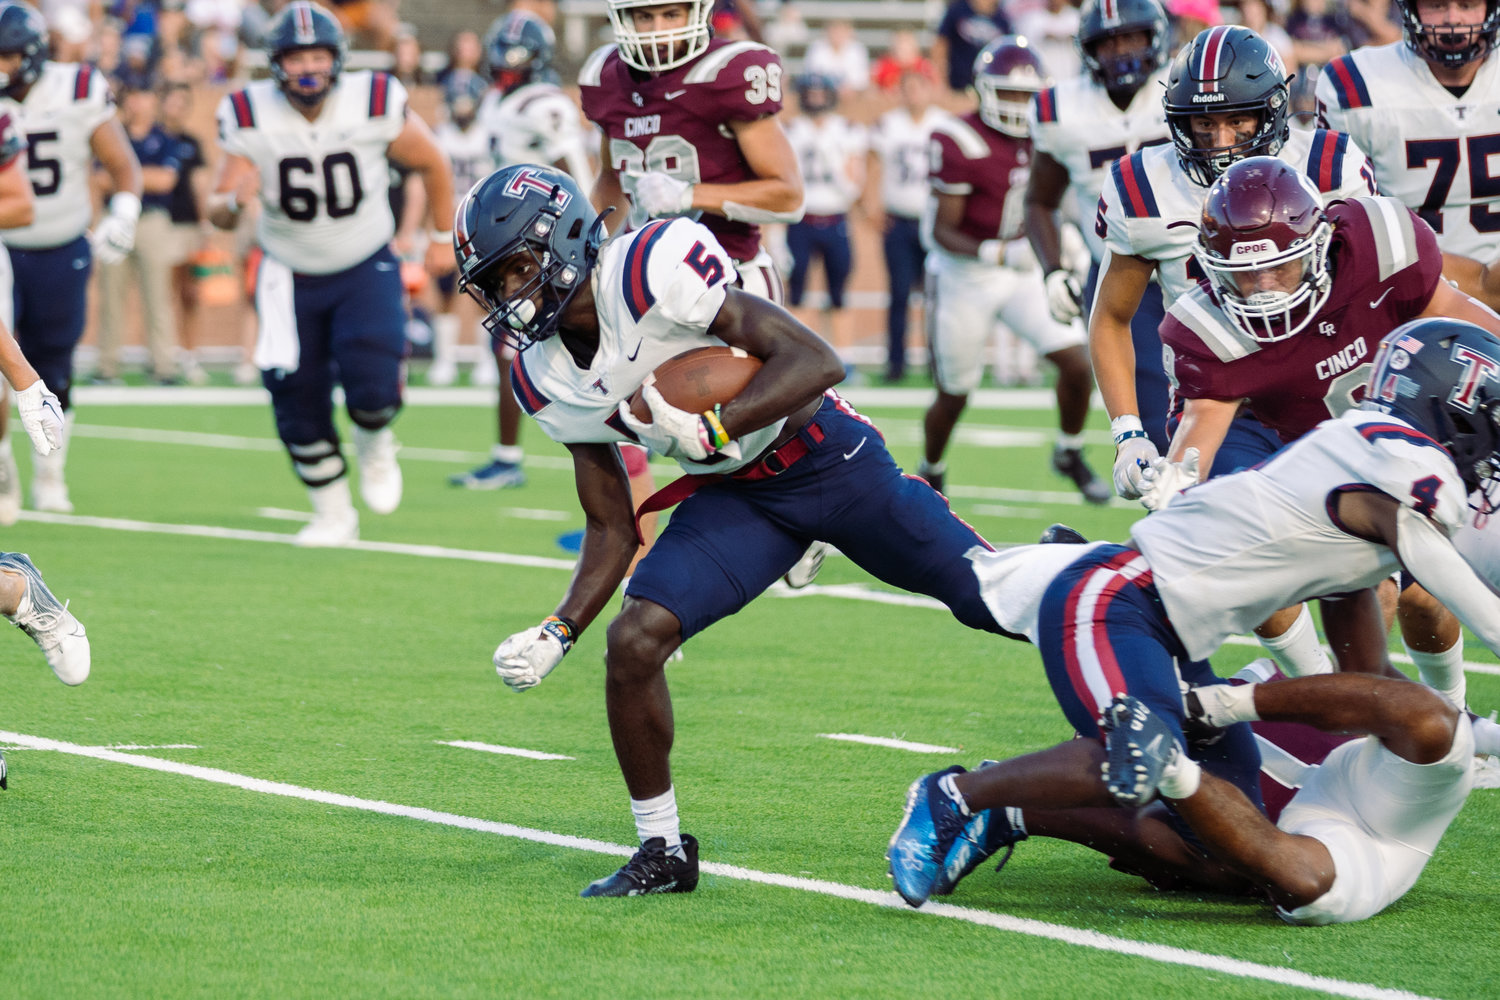 Tompkins’ Jhase McMillan breaks a tackle during Friday’s game between Cinco Ranch and Tompkins at Rhodes Stadium.